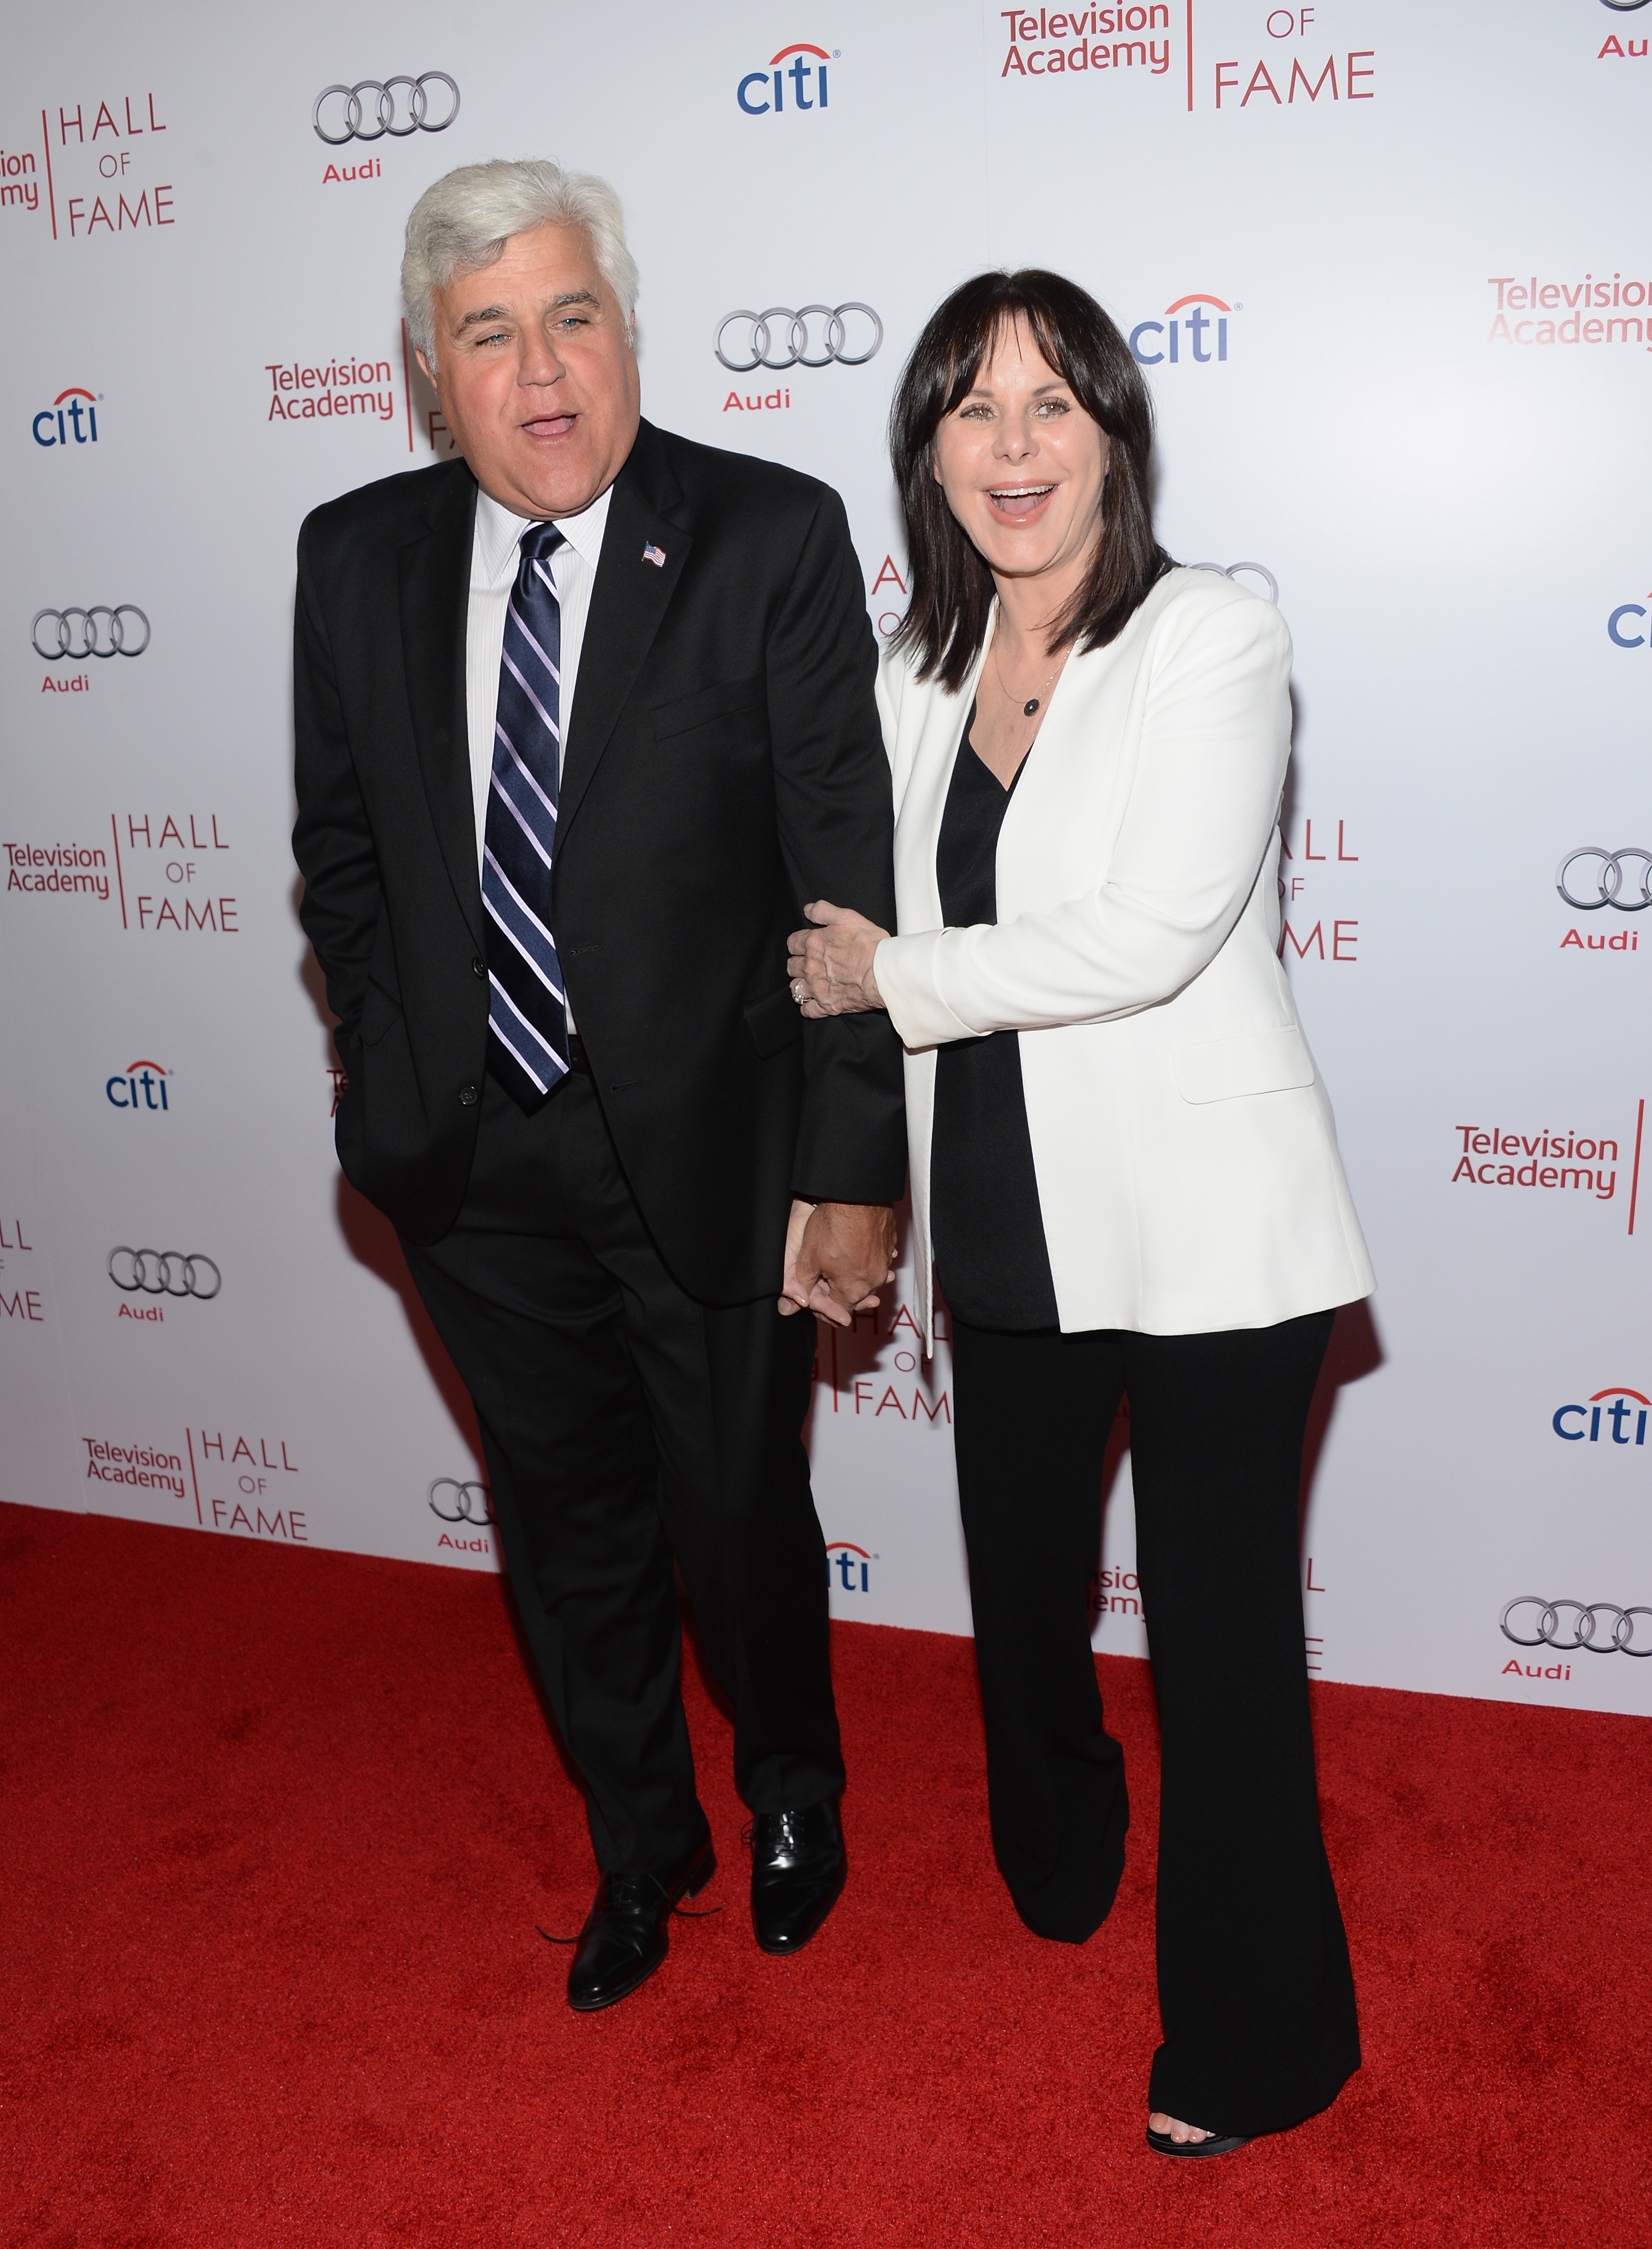 Jay Leno and Mavis Leno attend The Television Academy's 23rd Hall Of Fame Induction Gala at Regent Beverly Wilshire Hotel on March 11, 2014, in Beverly Hills, California. | Source: Getty Images